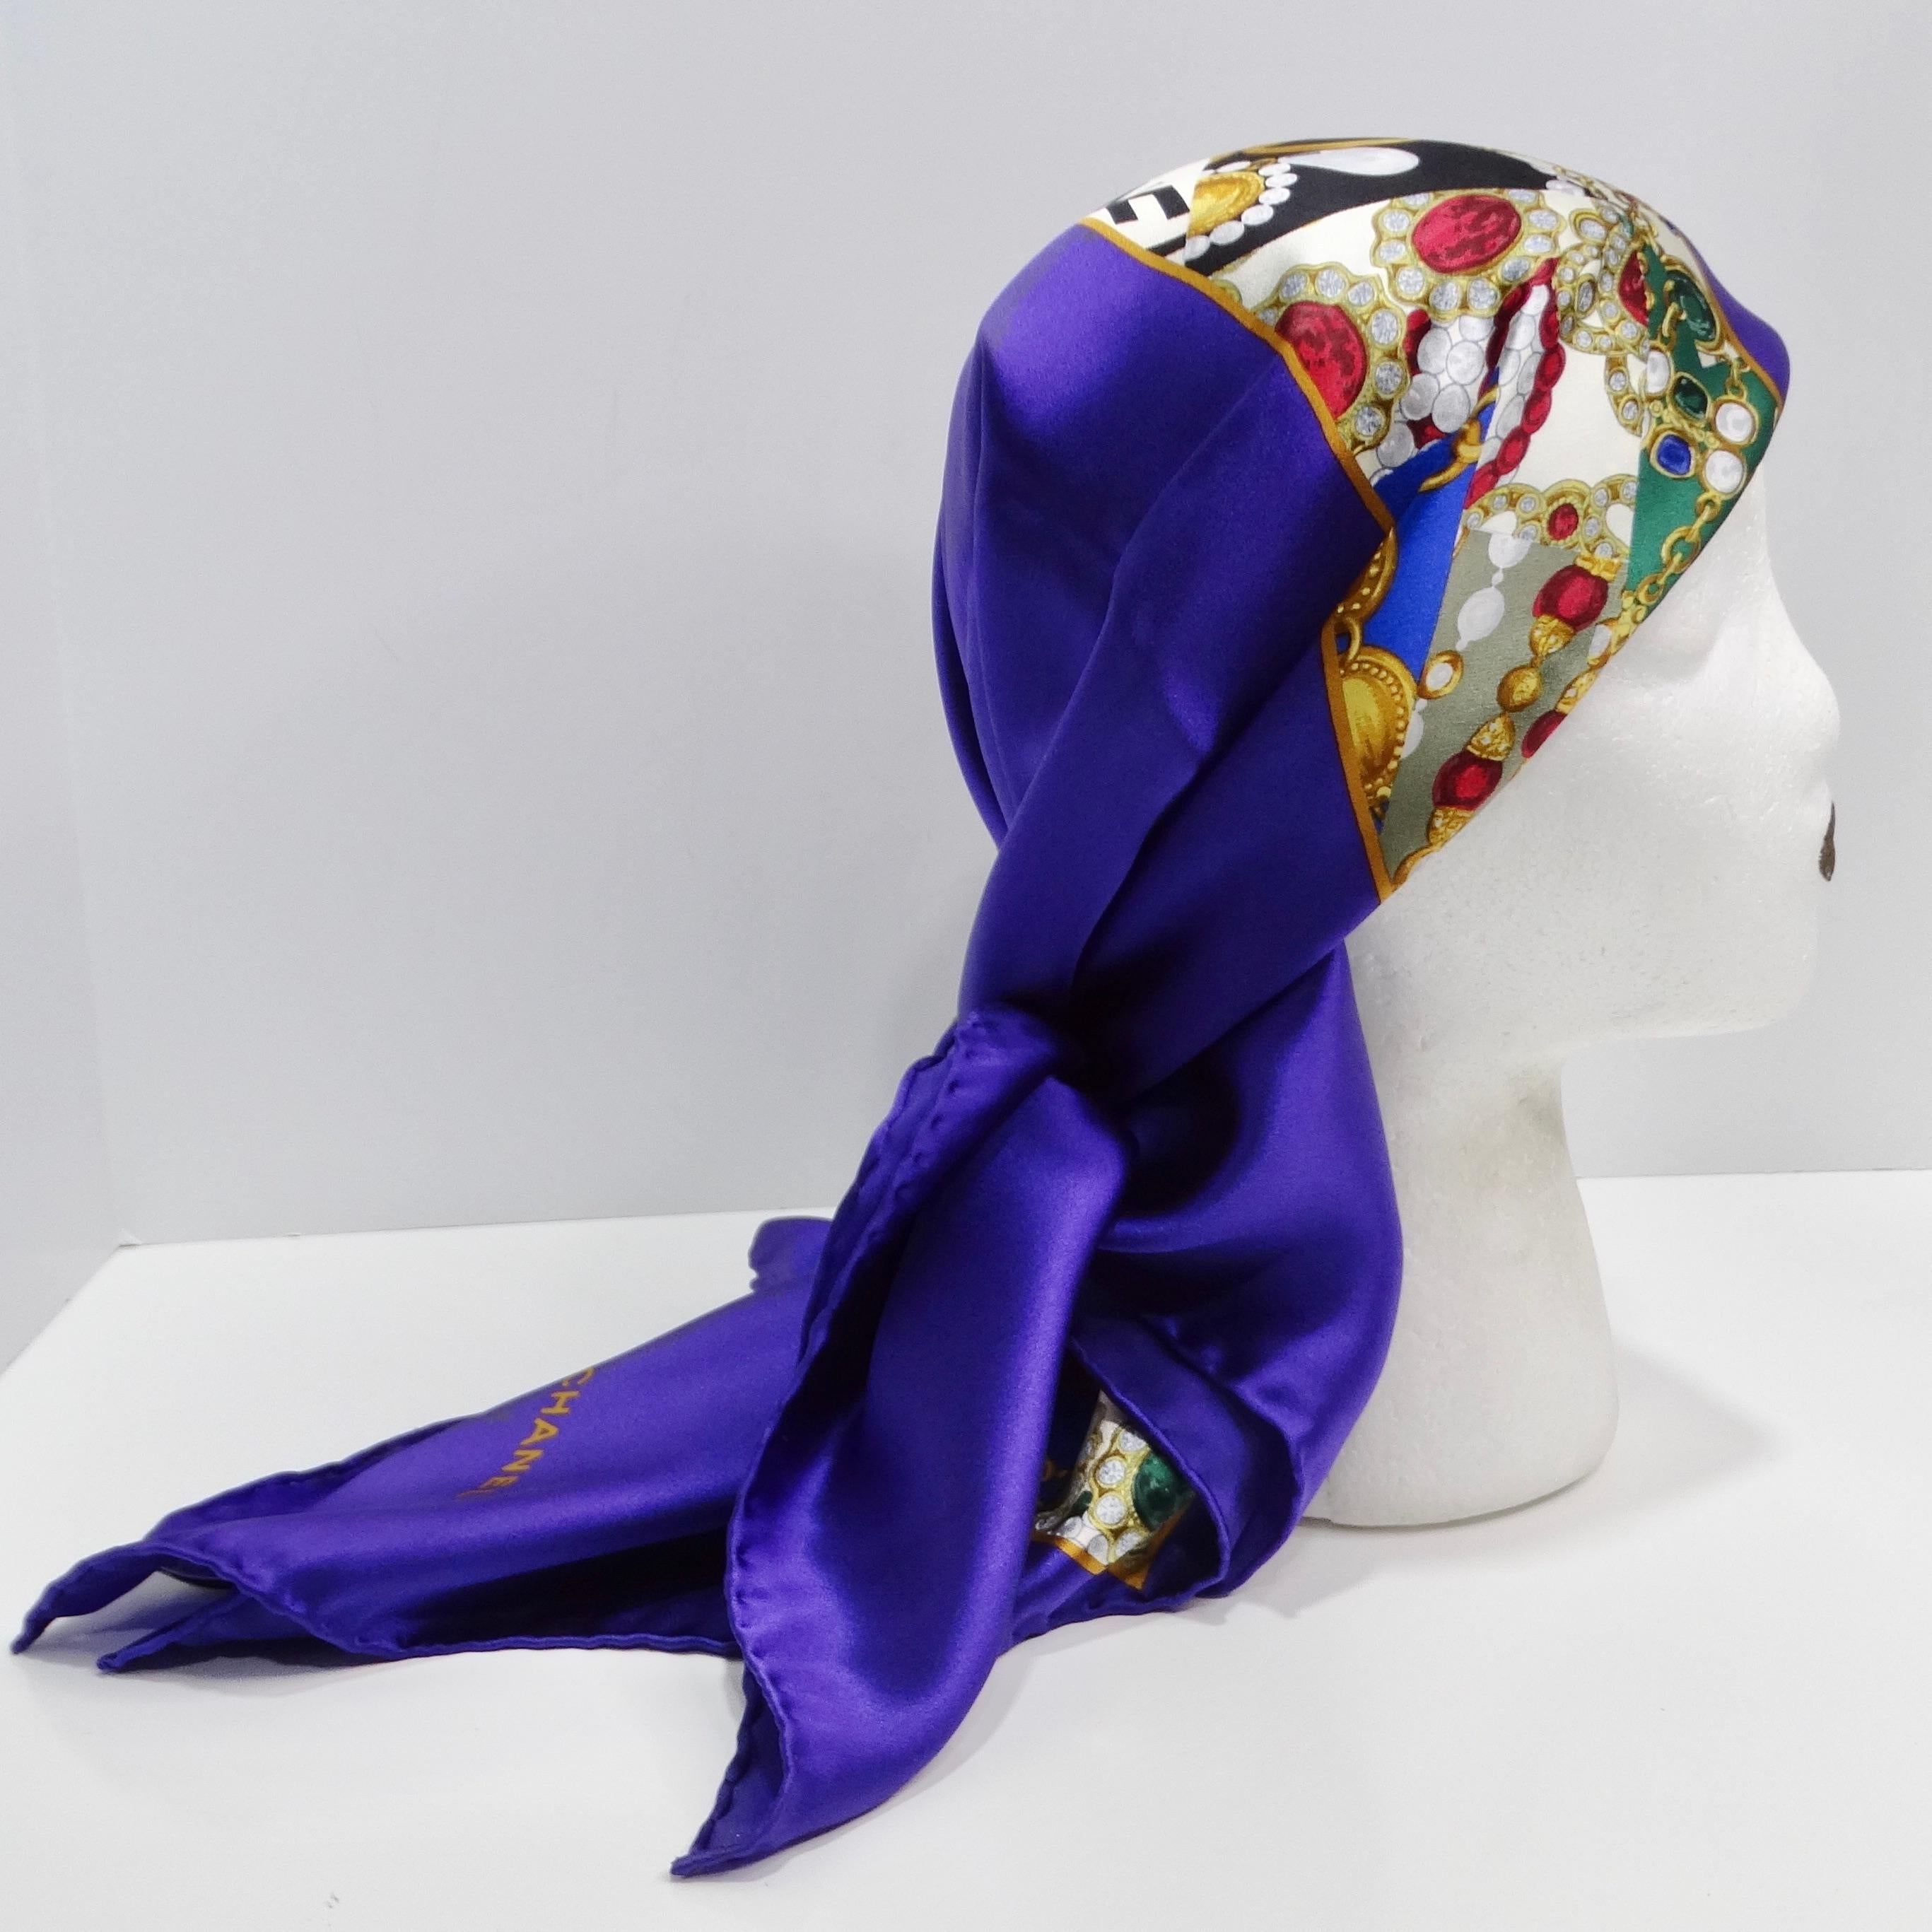 The Chanel 1990s Purple Logo Printed Silk Scarf is a luxurious accessory that epitomizes the elegance and sophistication of the Chanel brand. Crafted from sumptuous silk, this scarf features a vibrant purple background that adds a rich and regal